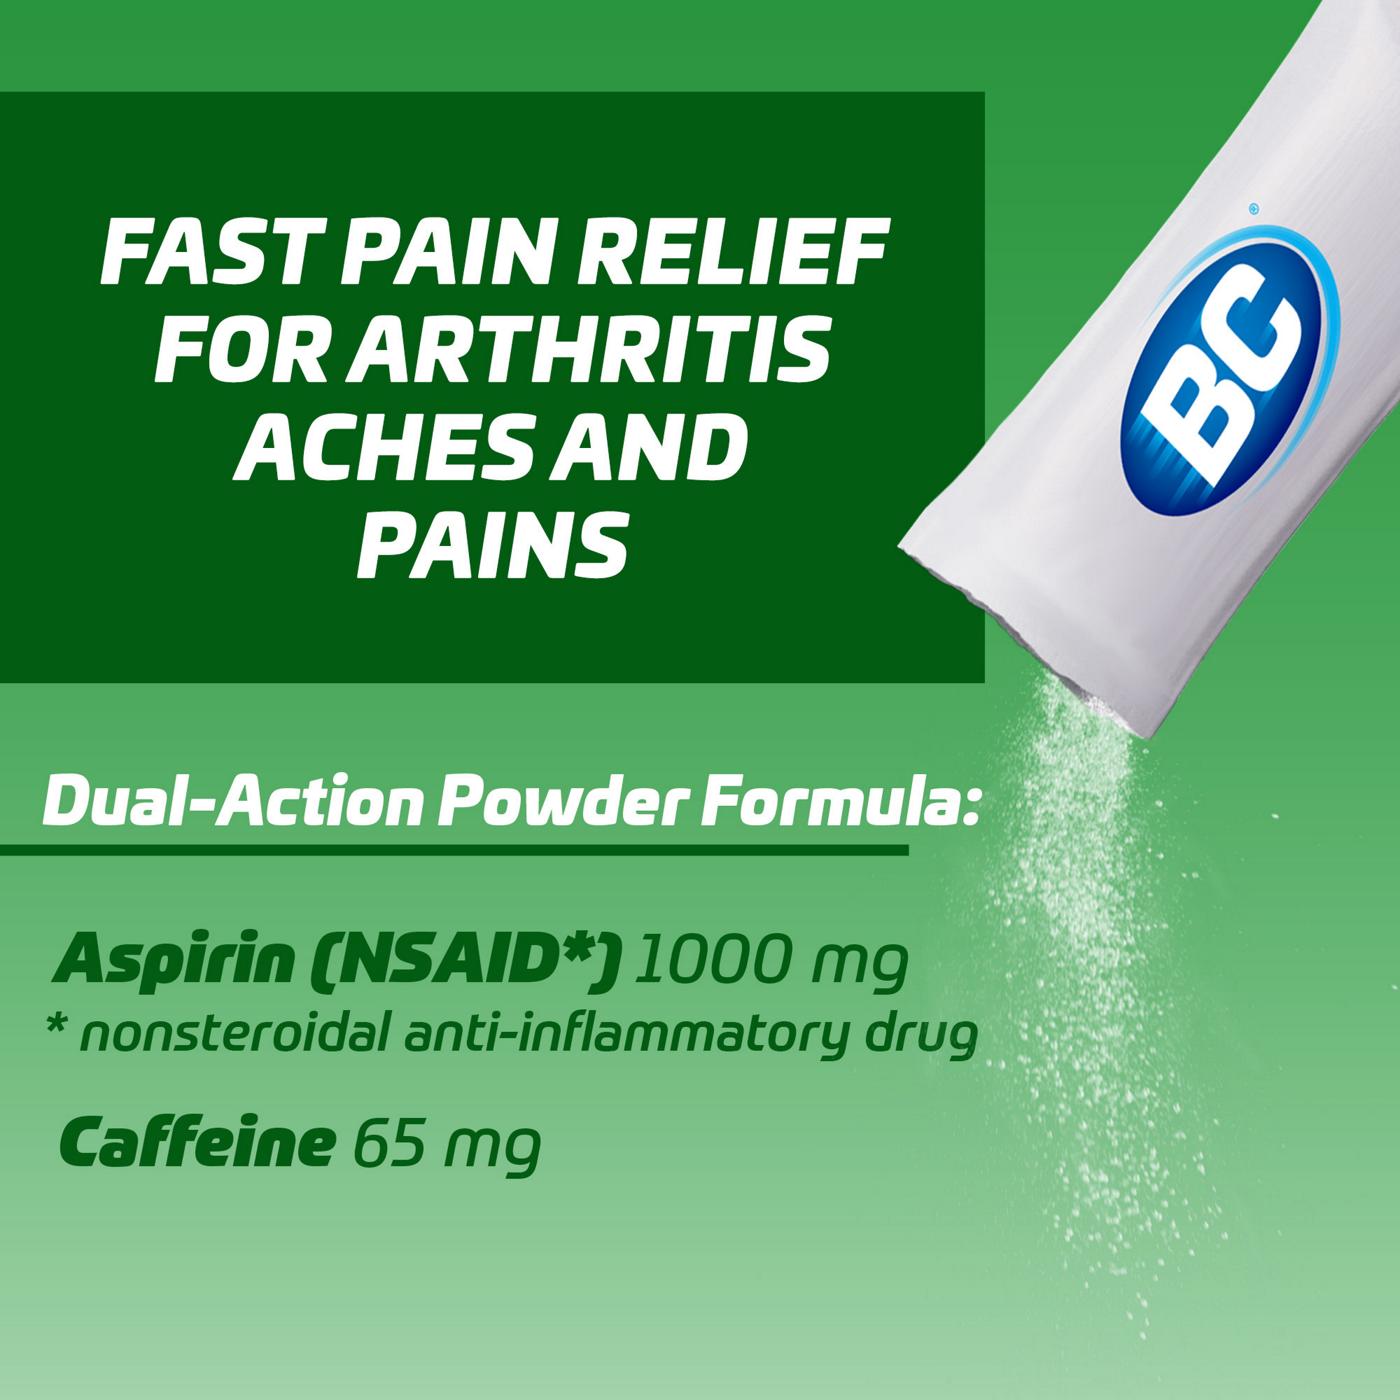 BC Arthritis Pain Relief Powder Packets; image 4 of 5